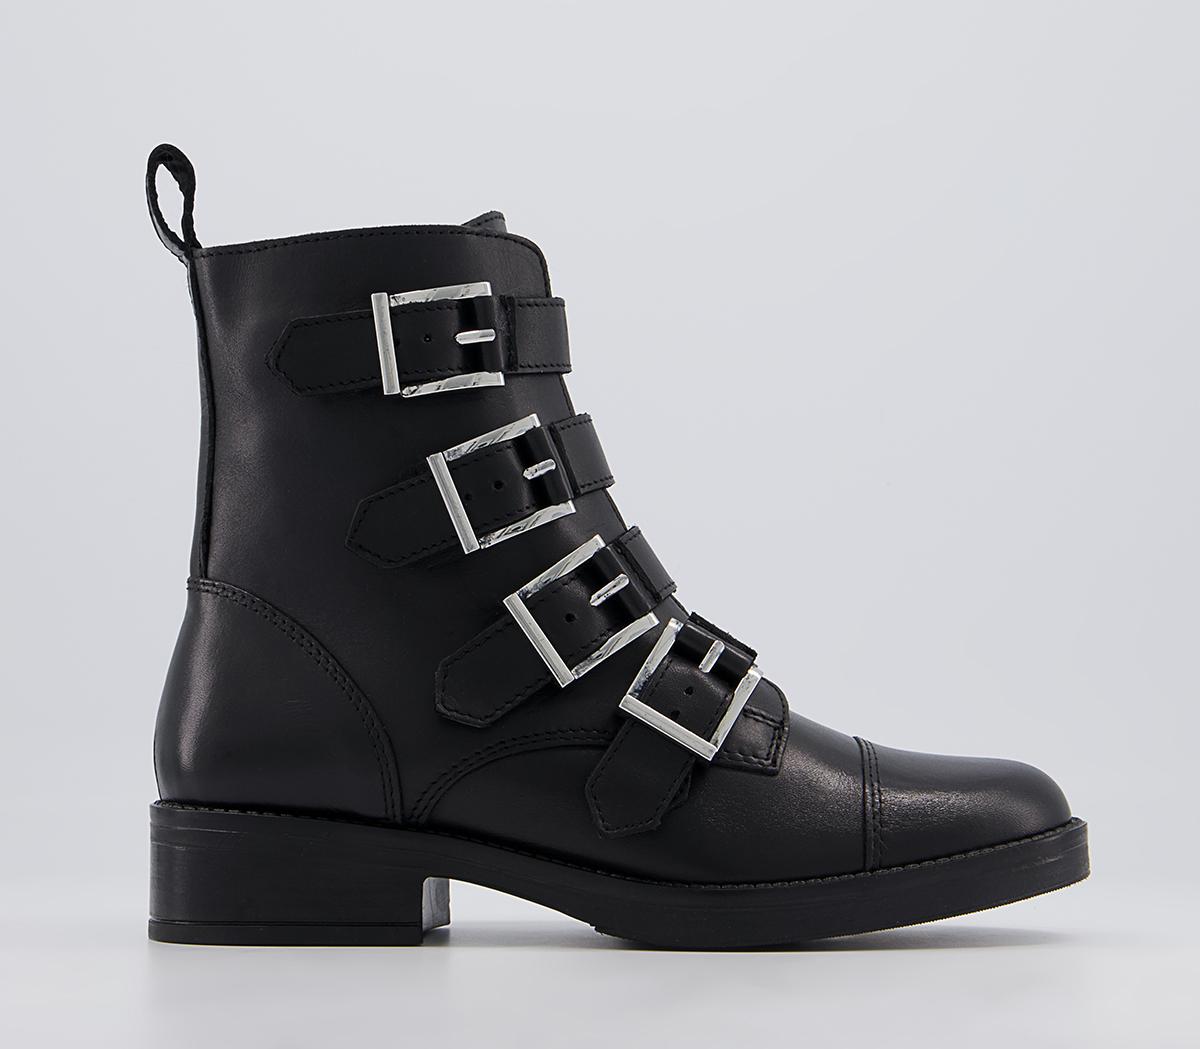 OFFICE Apricot Multi Buckle Boots Black Leather - Women's Ankle Boots